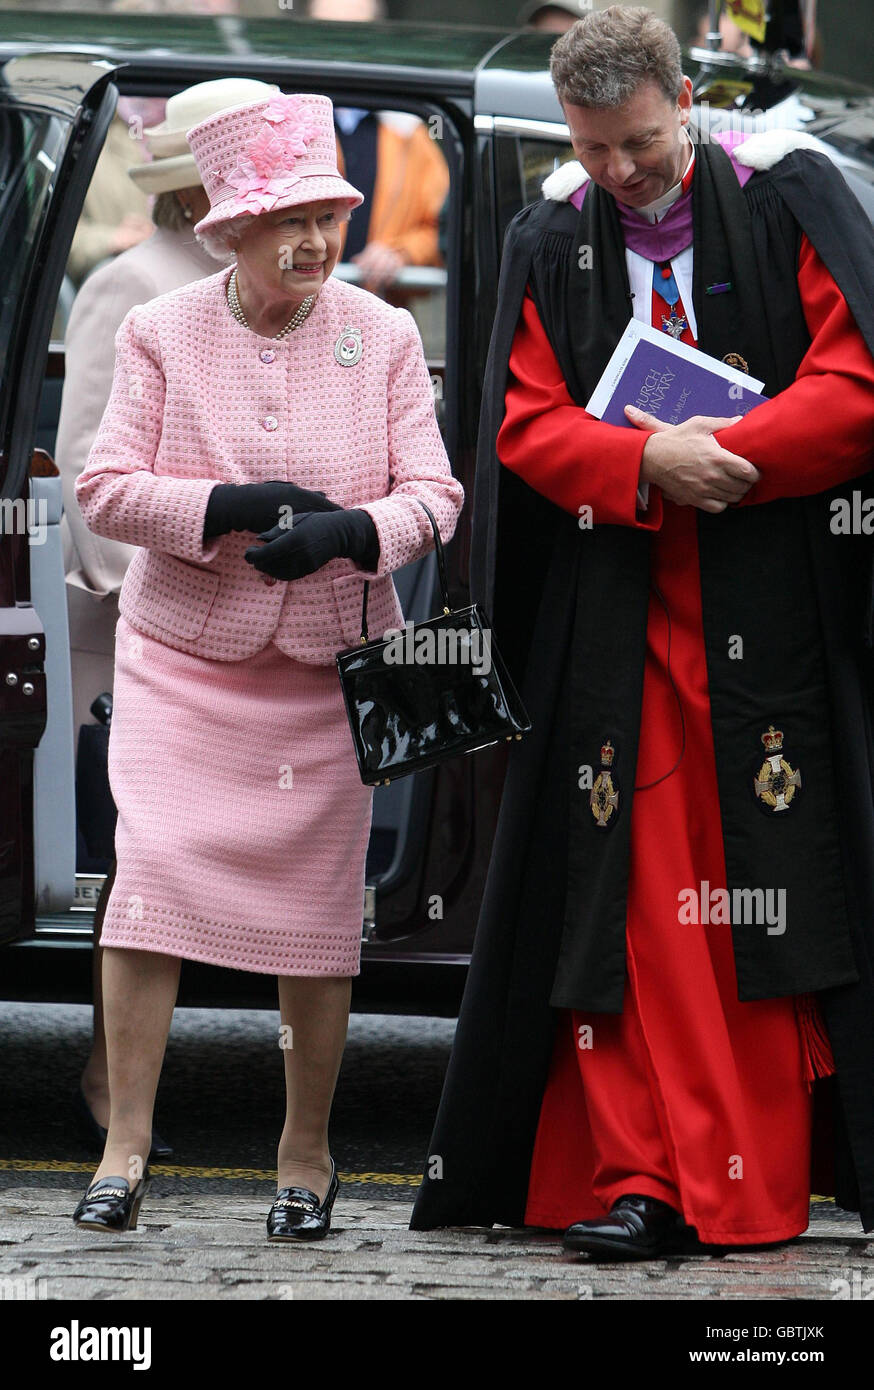 The Queen attends church Stock Photo